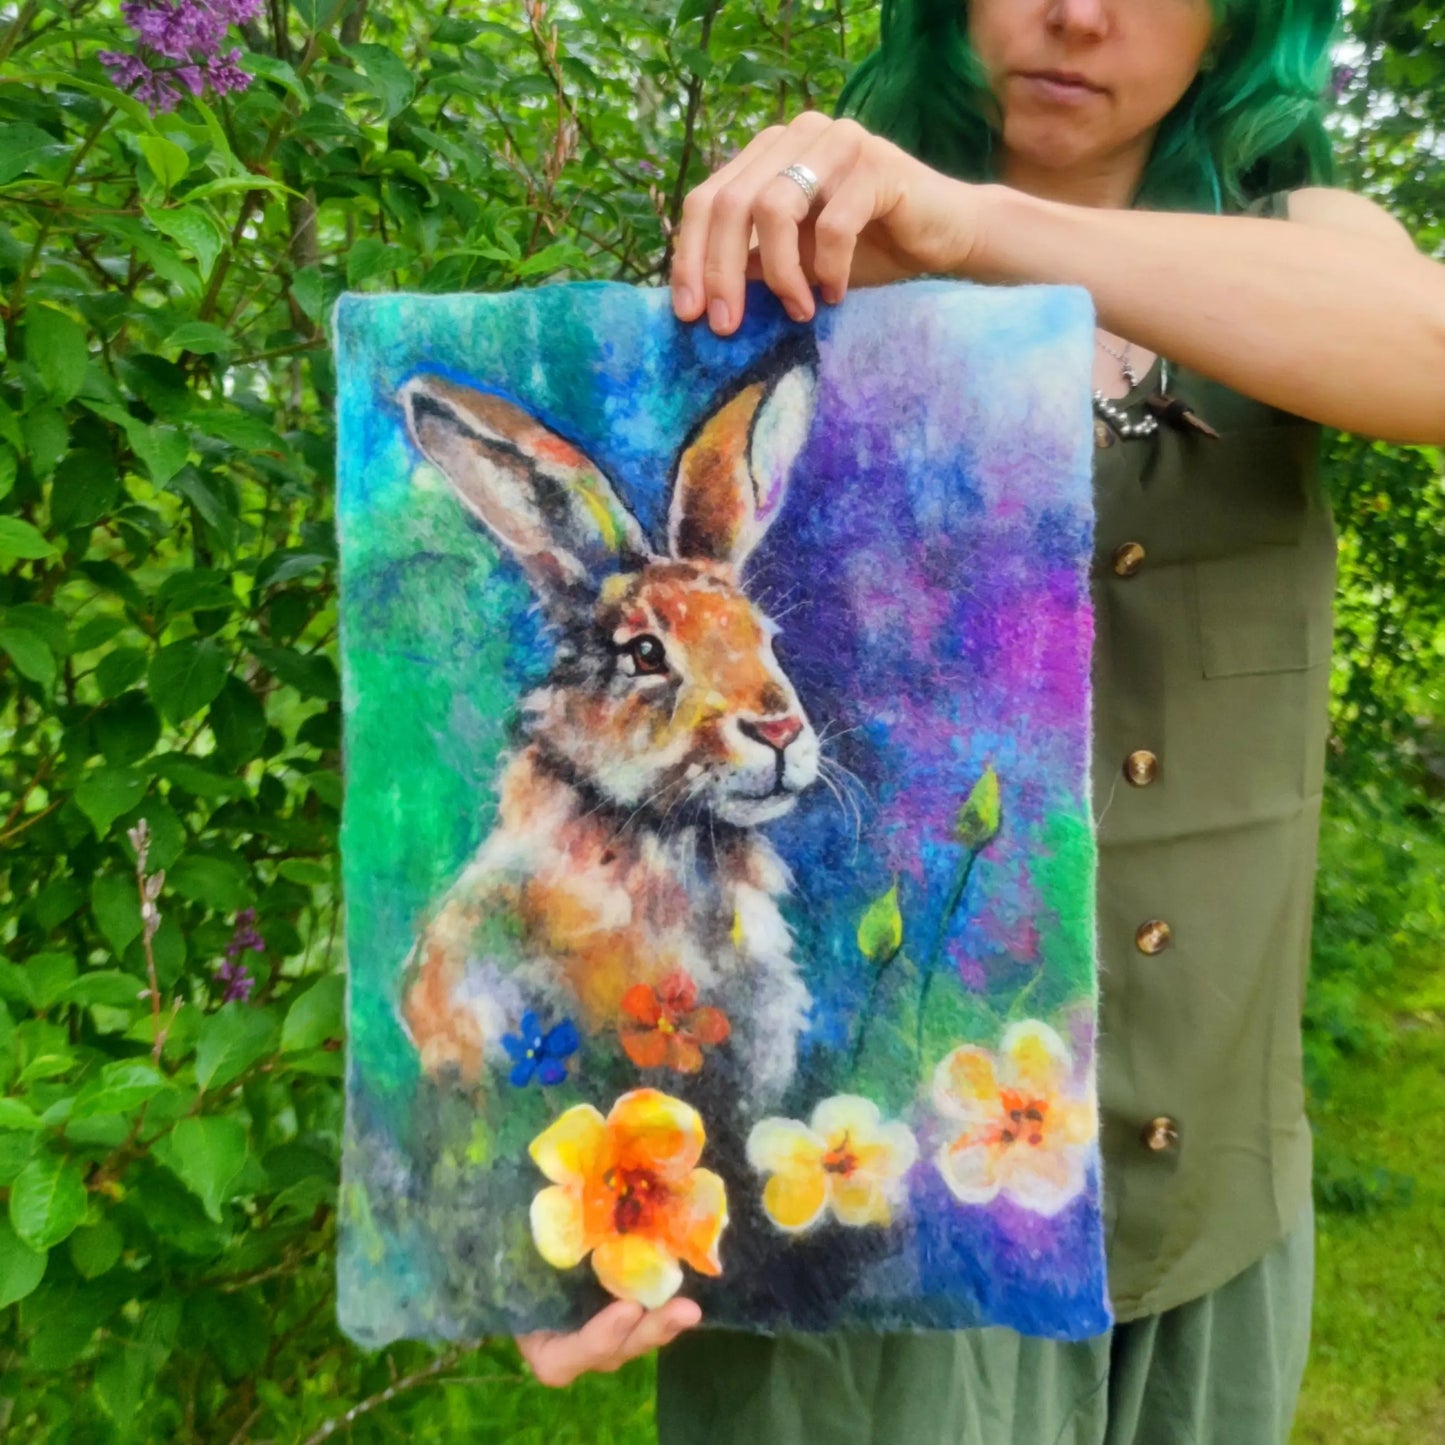 Wool Painting ”Summer Joy in the Company of a Hare”, from the Whimsical Wildlife in Bloom collection